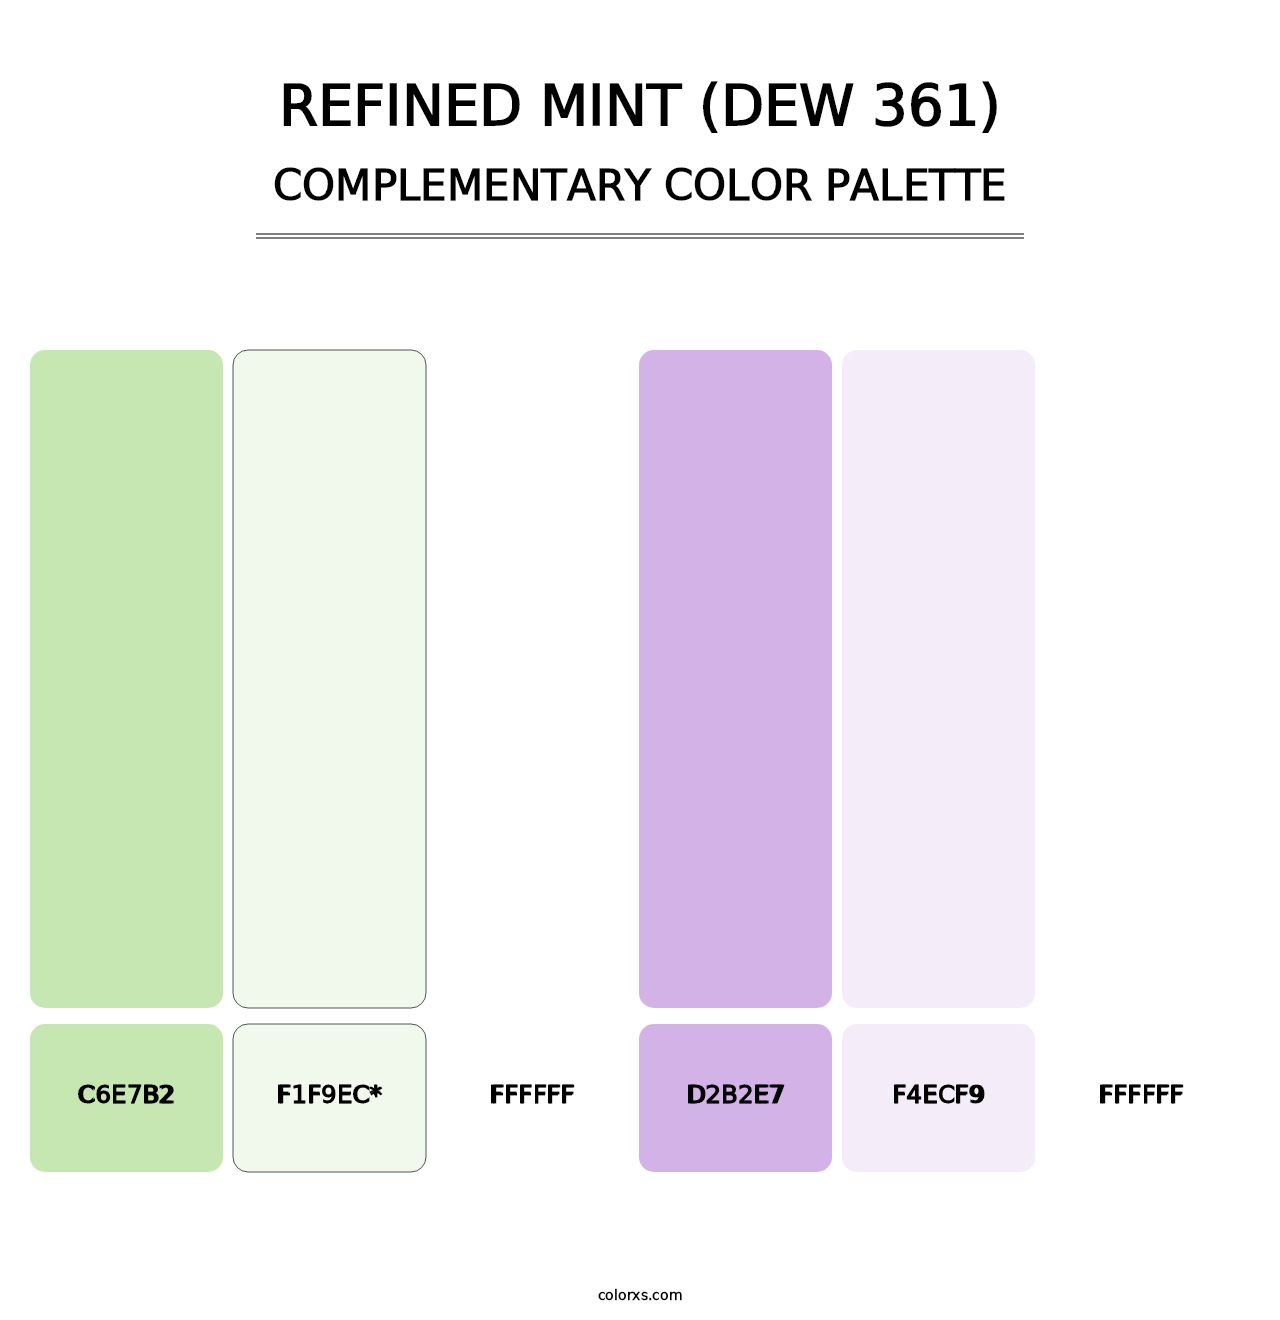 Refined Mint (DEW 361) - Complementary Color Palette